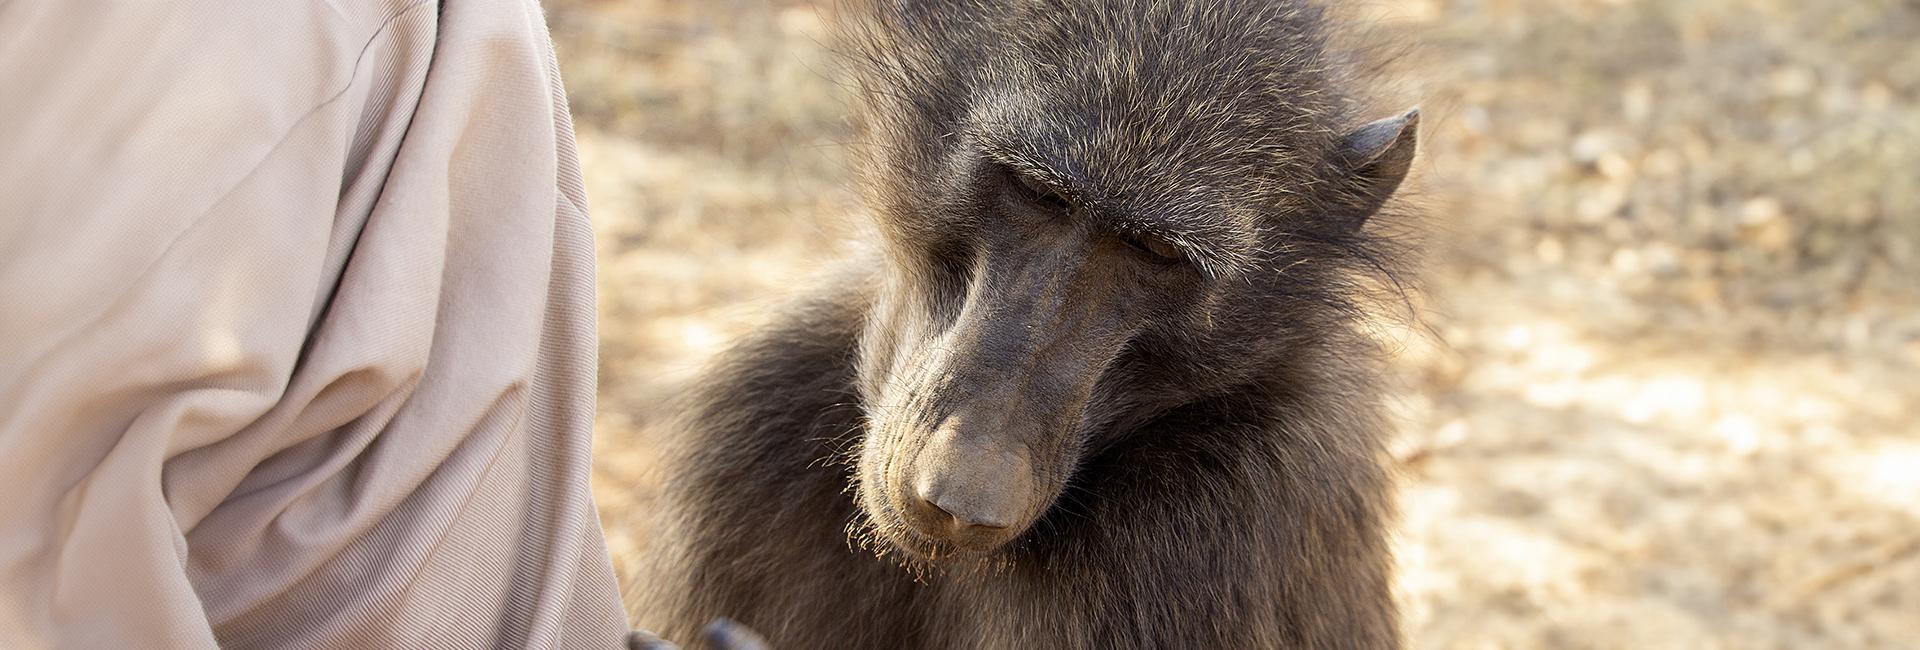 Meet Shrinky... A Very Special Baboon From The Namibia Wildlife Sanctuary!